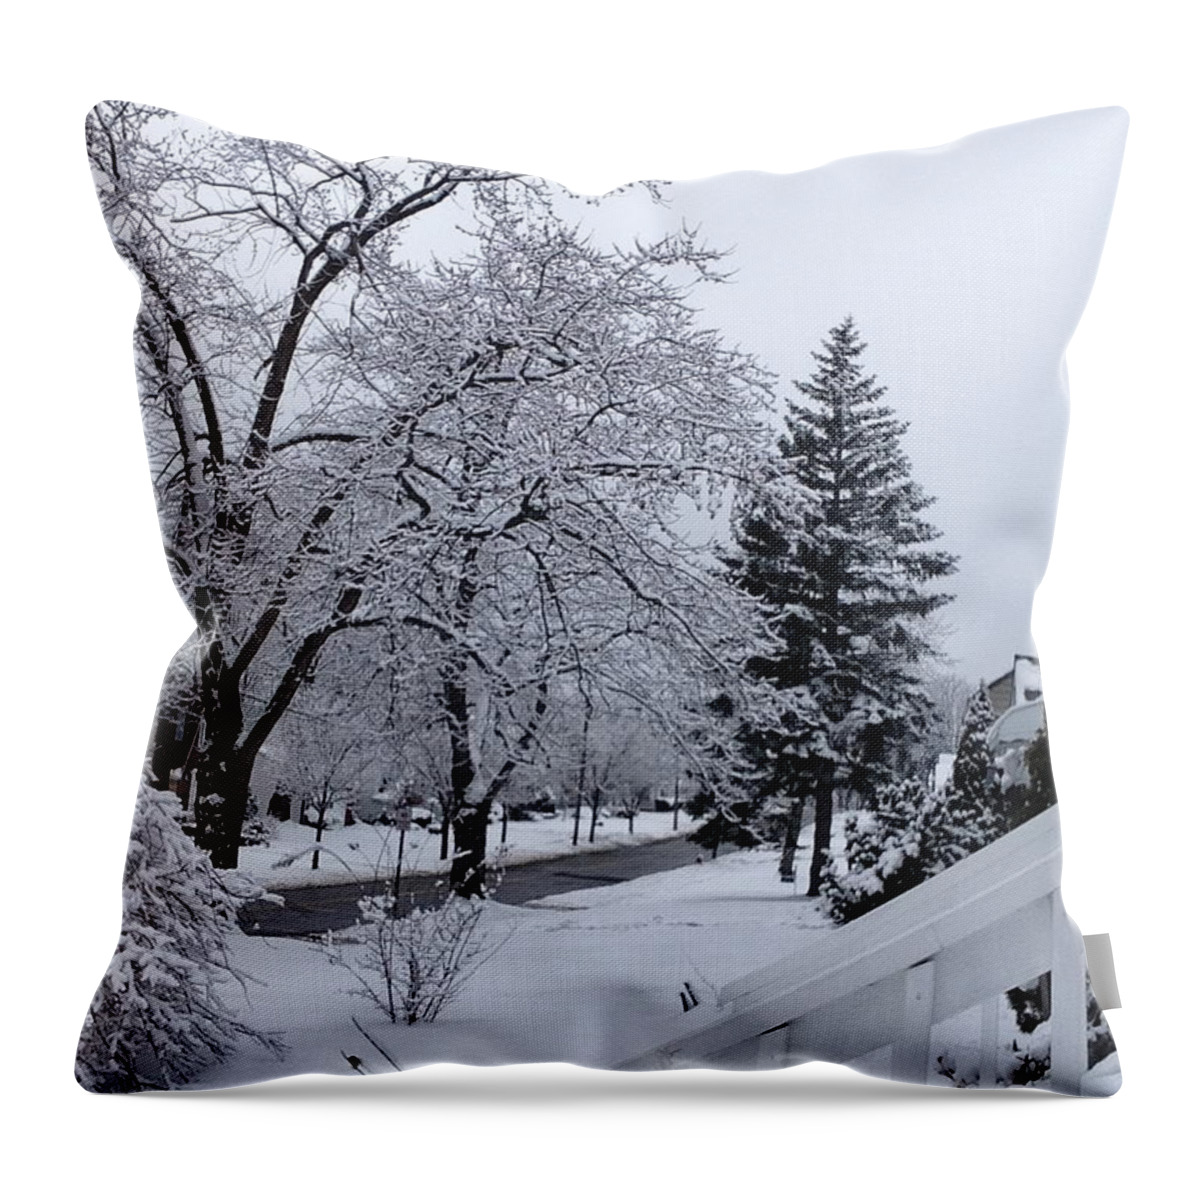 Snow Throw Pillow featuring the photograph Winter Lace by Barbara Keith